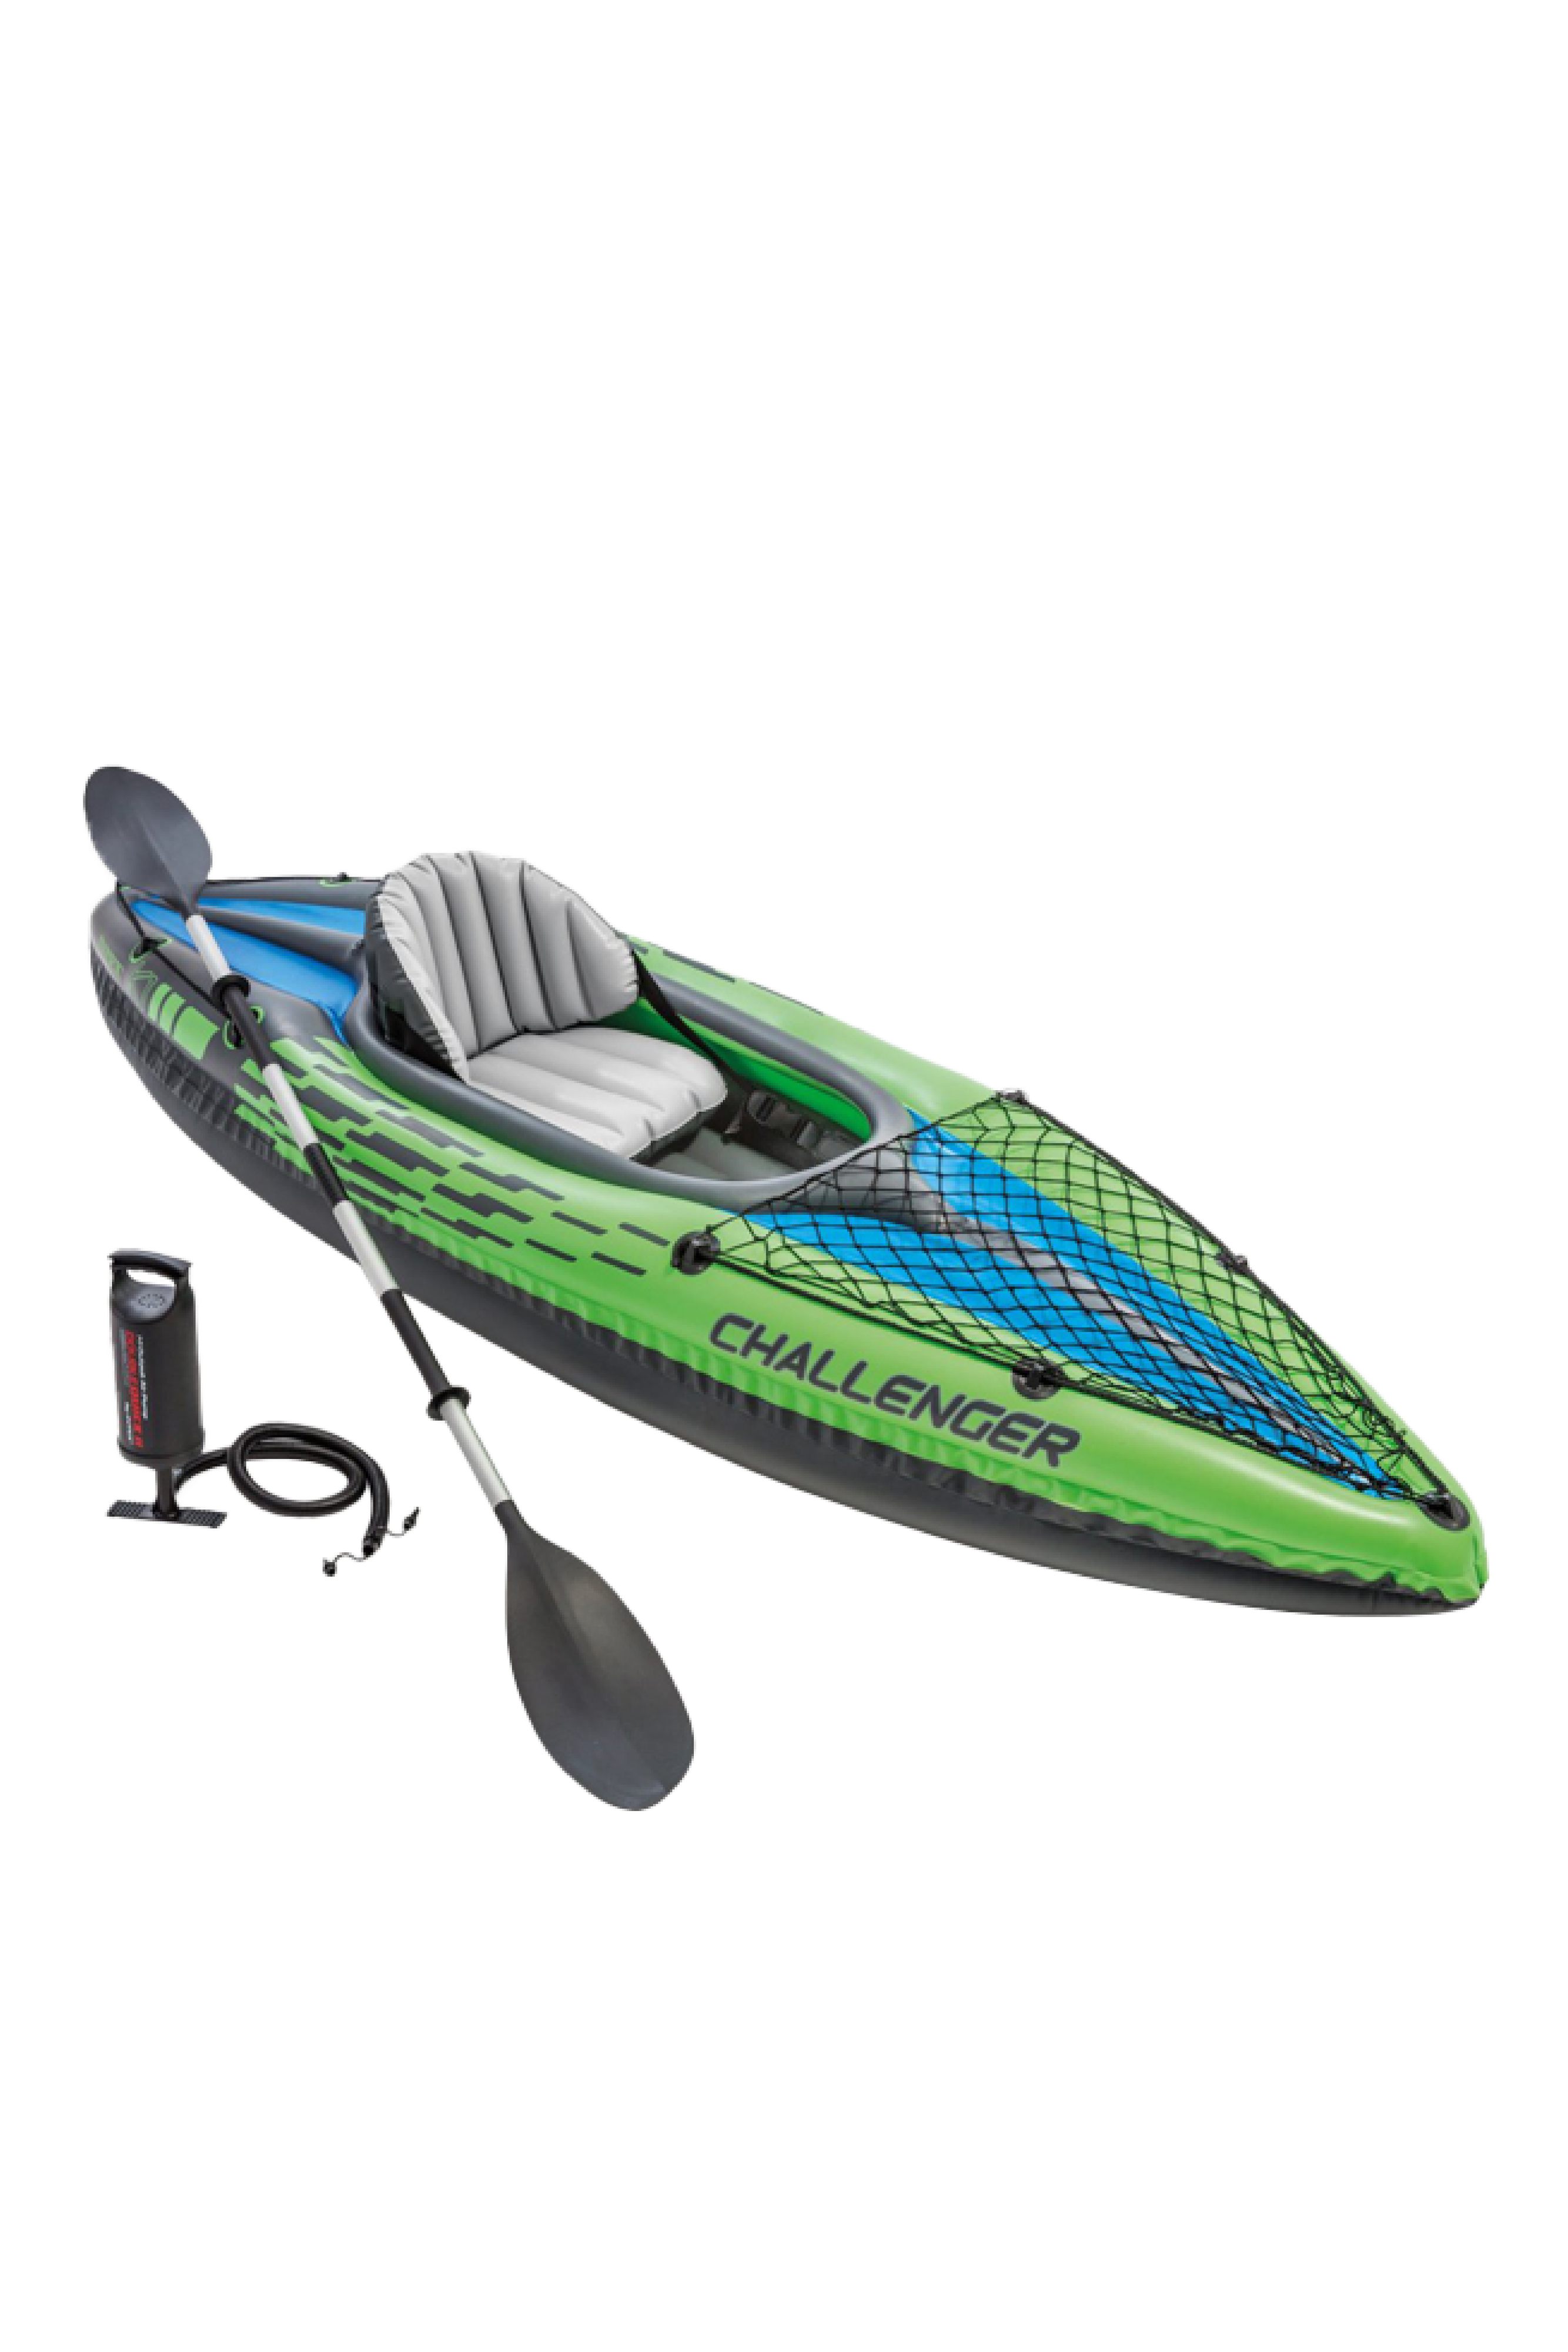 Still Fishing With My Intex K1 Inflatable Kayak After 18 Months 